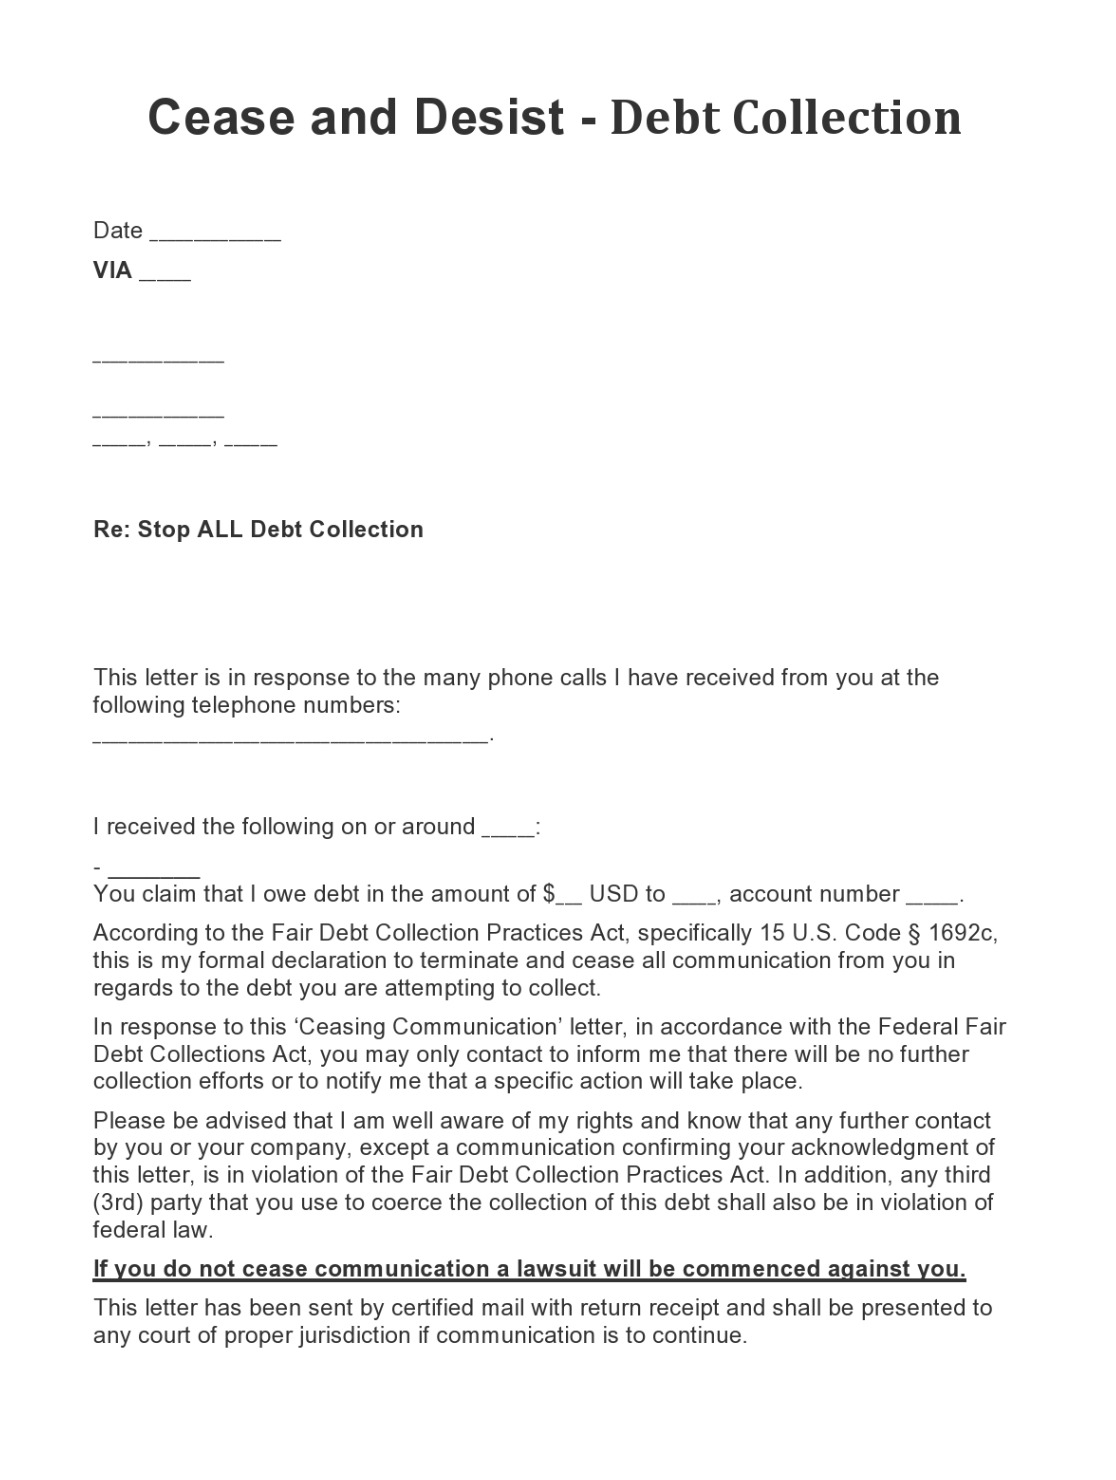 sample cease and desist letter for debt collection